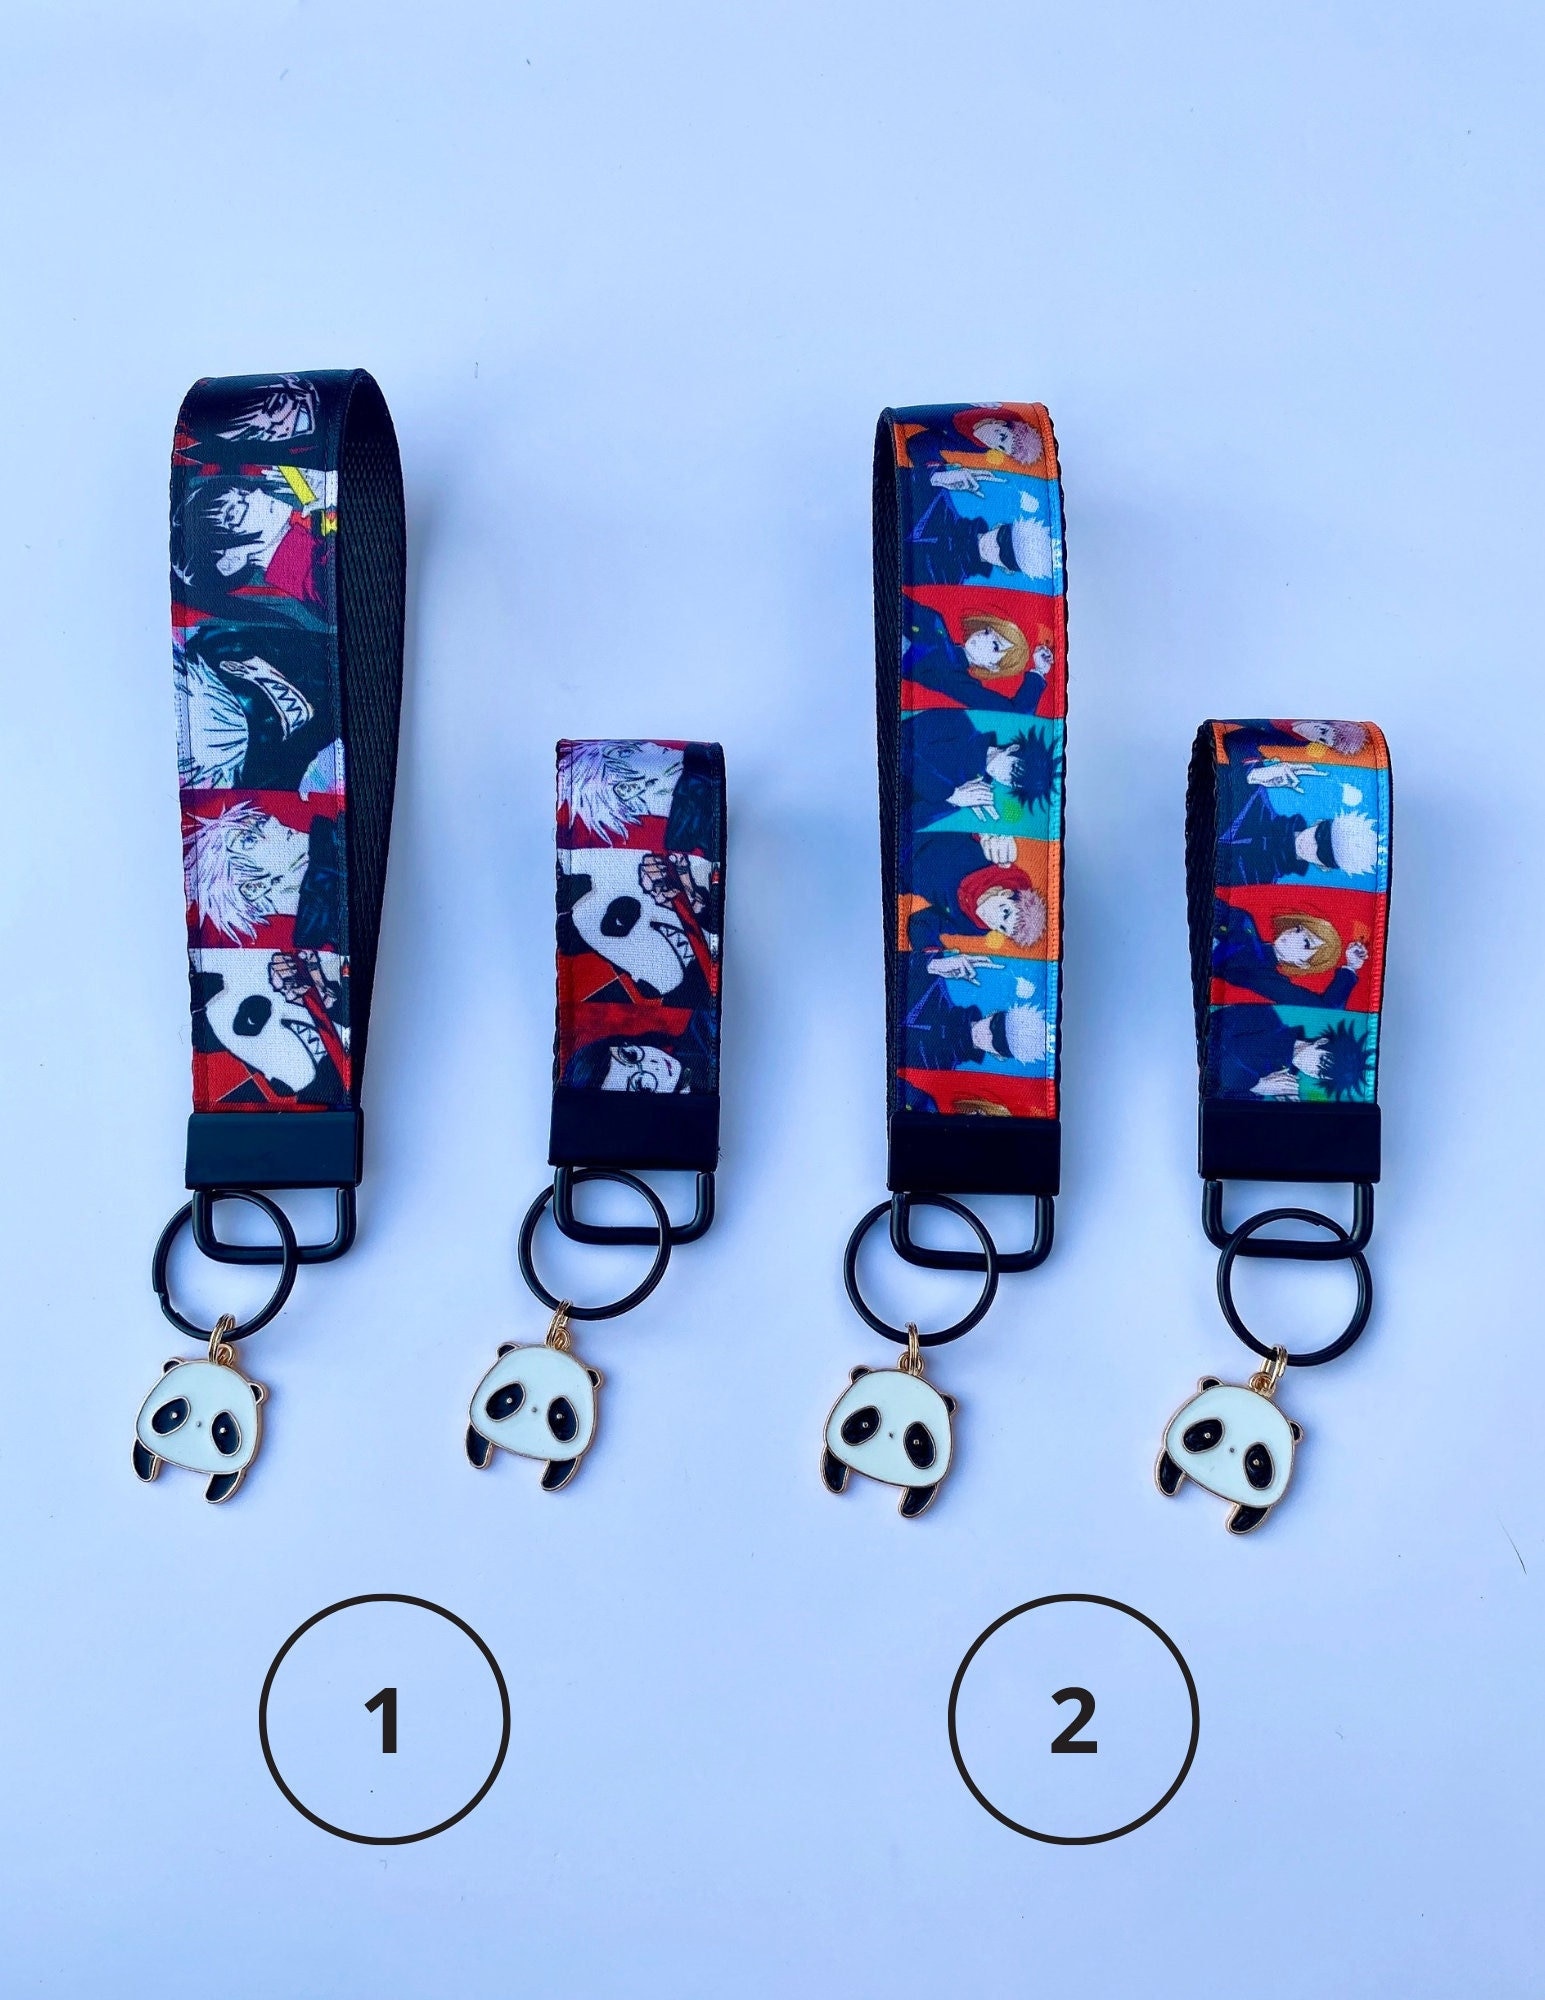 New Cartoon Anime Jujutsu Kaisen Lanyard Keychain For Keys Badge ID Mobile  Phone Key Rings Neck Straps Accessories1224370 From Lirp, $18.8